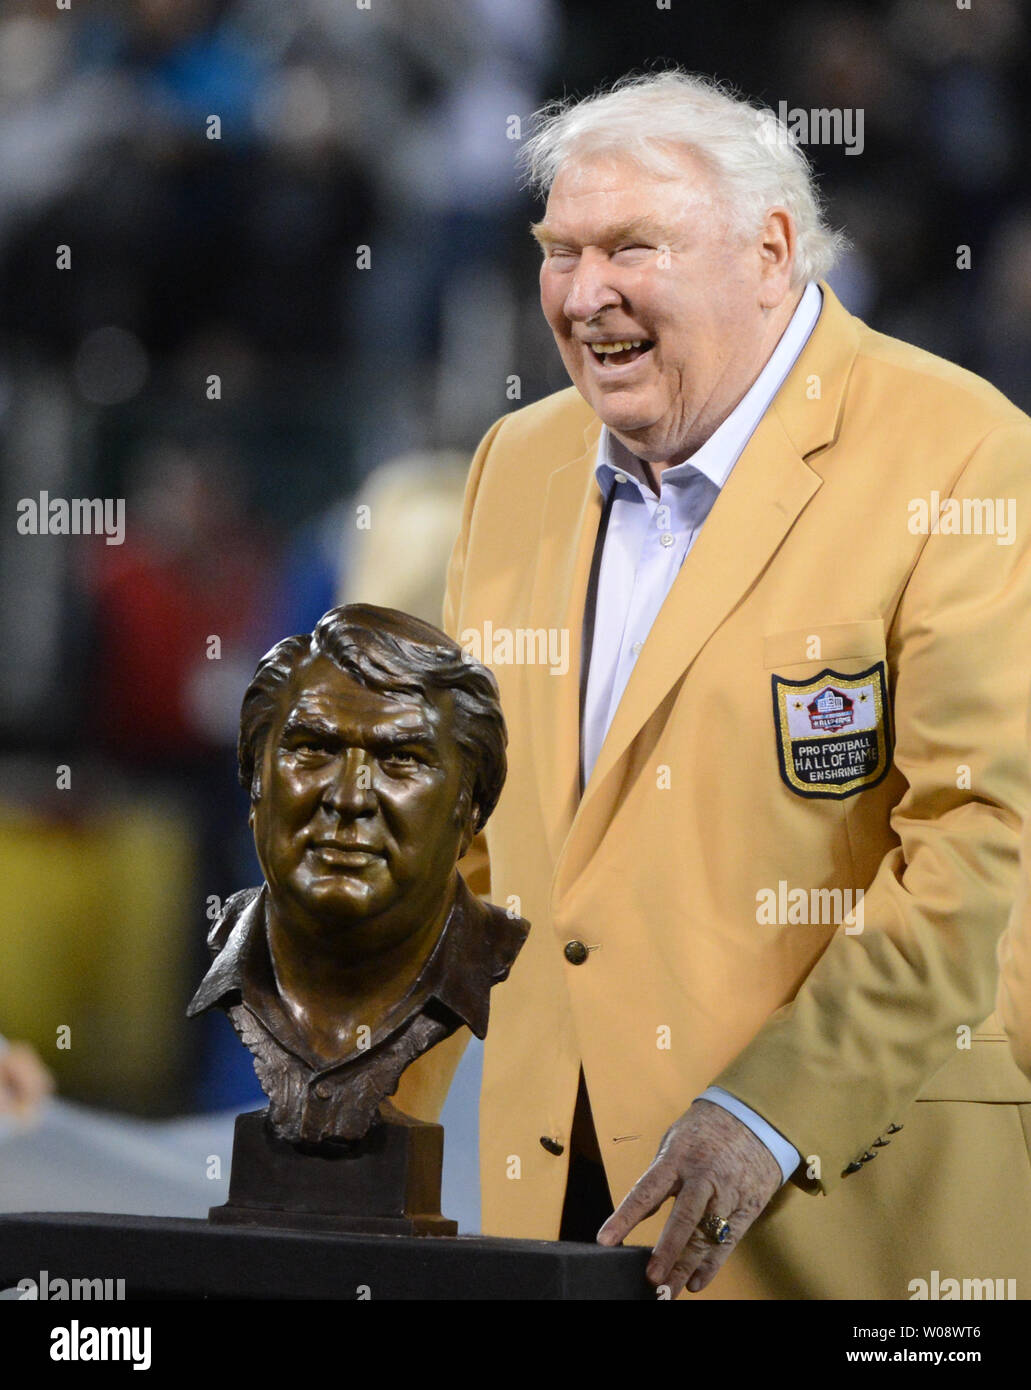 Oakland Raiders Hall of Fame coach John Madden stands with his bust during halftime ceremonies as the Raiders play the Denver Broncos at O.co Coliseum in Oakland, California on December 6, 2012. The Broncos defeated the Raiders 26-13.  UPI/Terry Schmitt Stock Photo